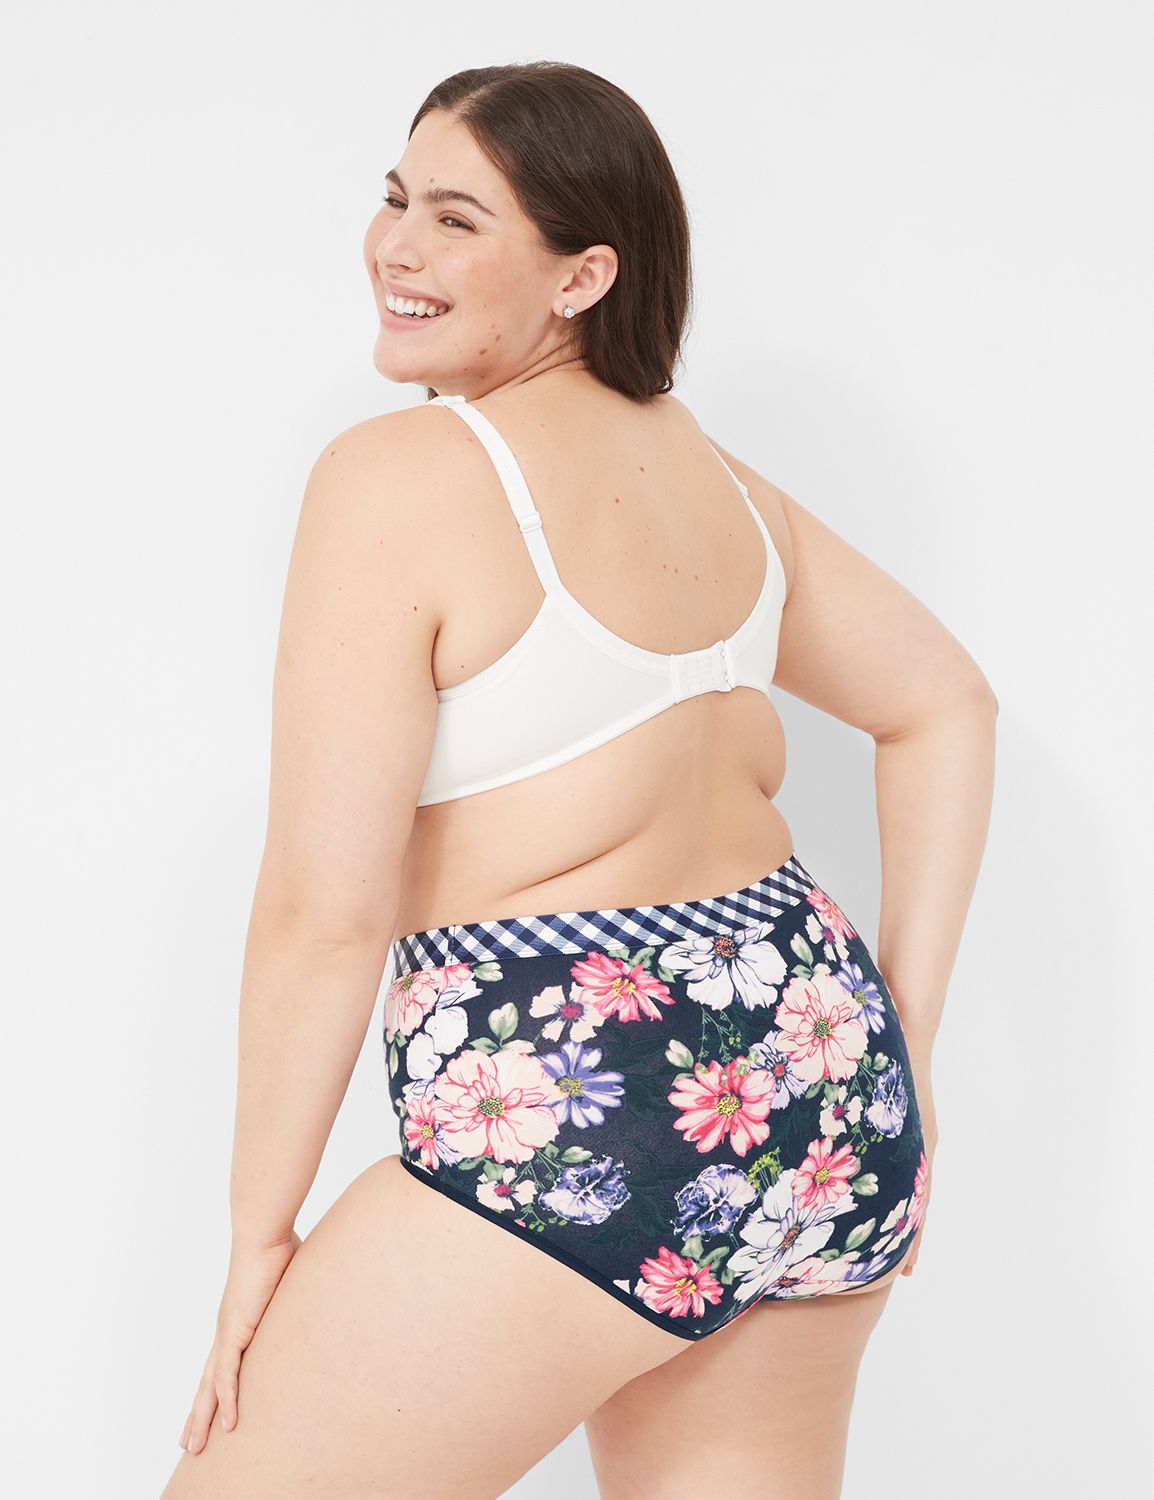 50% off, no need to put together an order] Plus size underwear for